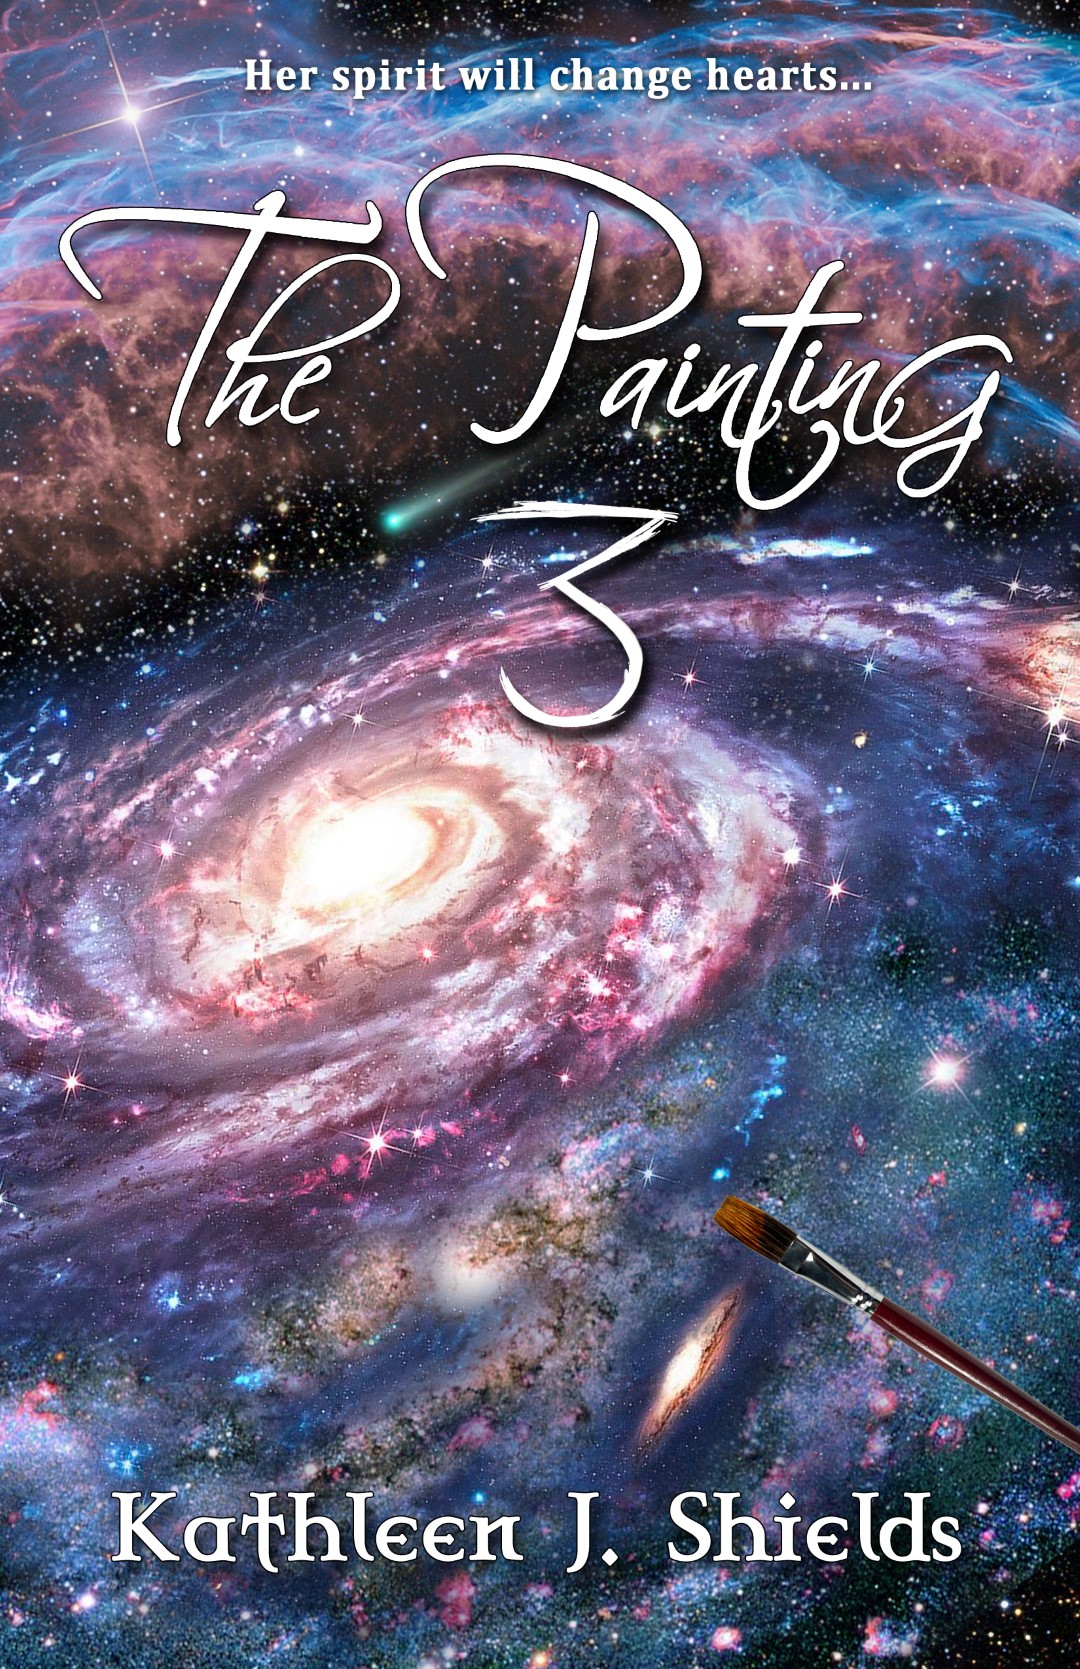 The Painting 3, Christian Trilogy by Author Kathleen J. Shields